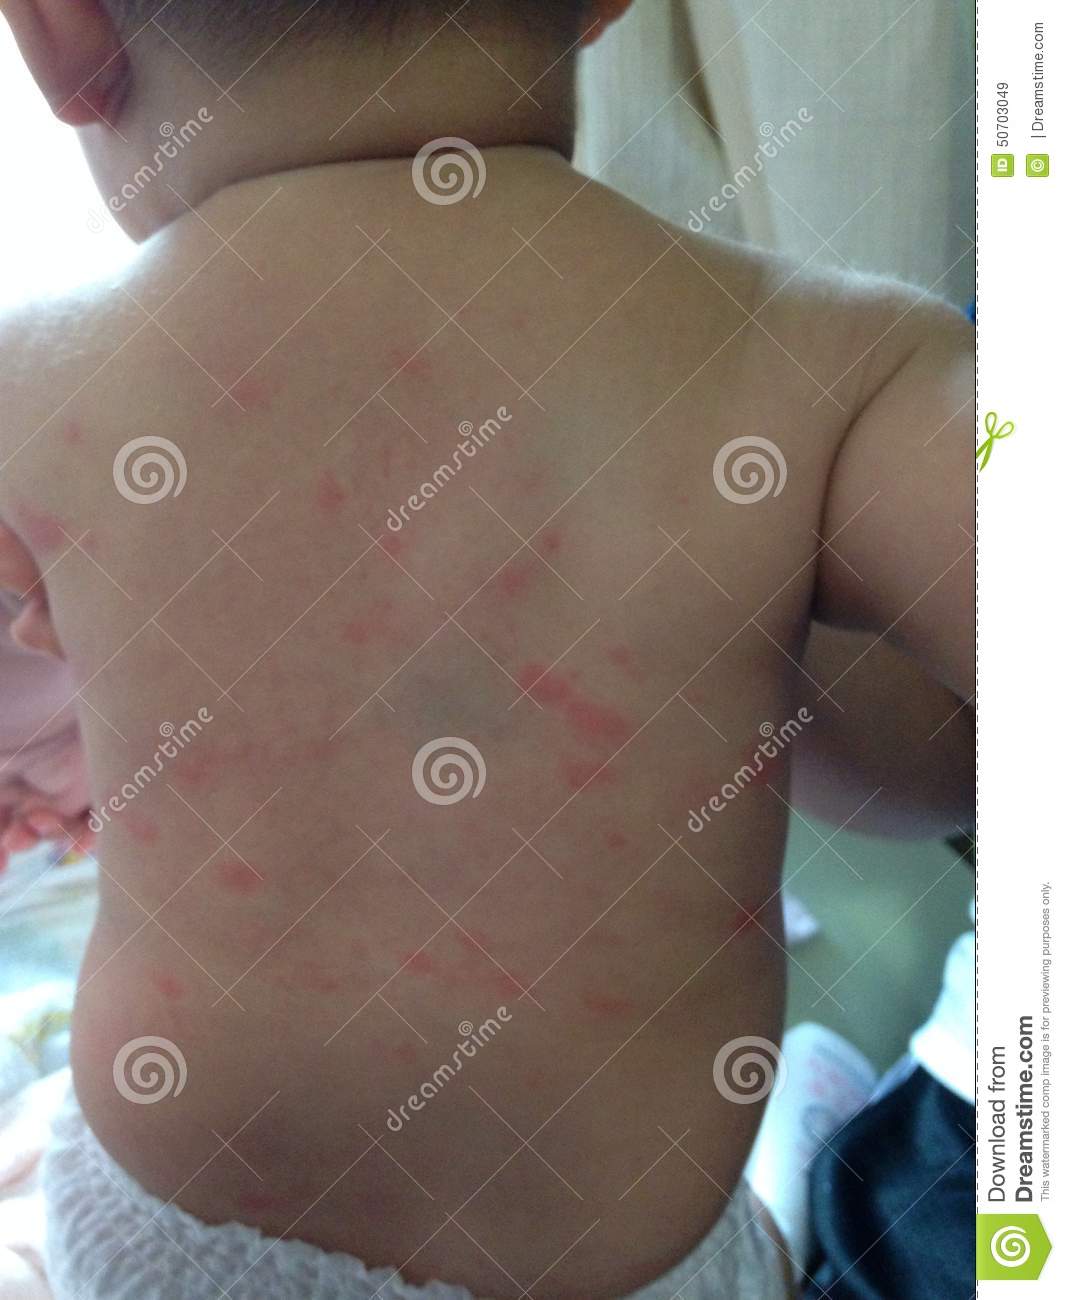 Hives On Baby Stomach / Rash On Baby Stomach Identification